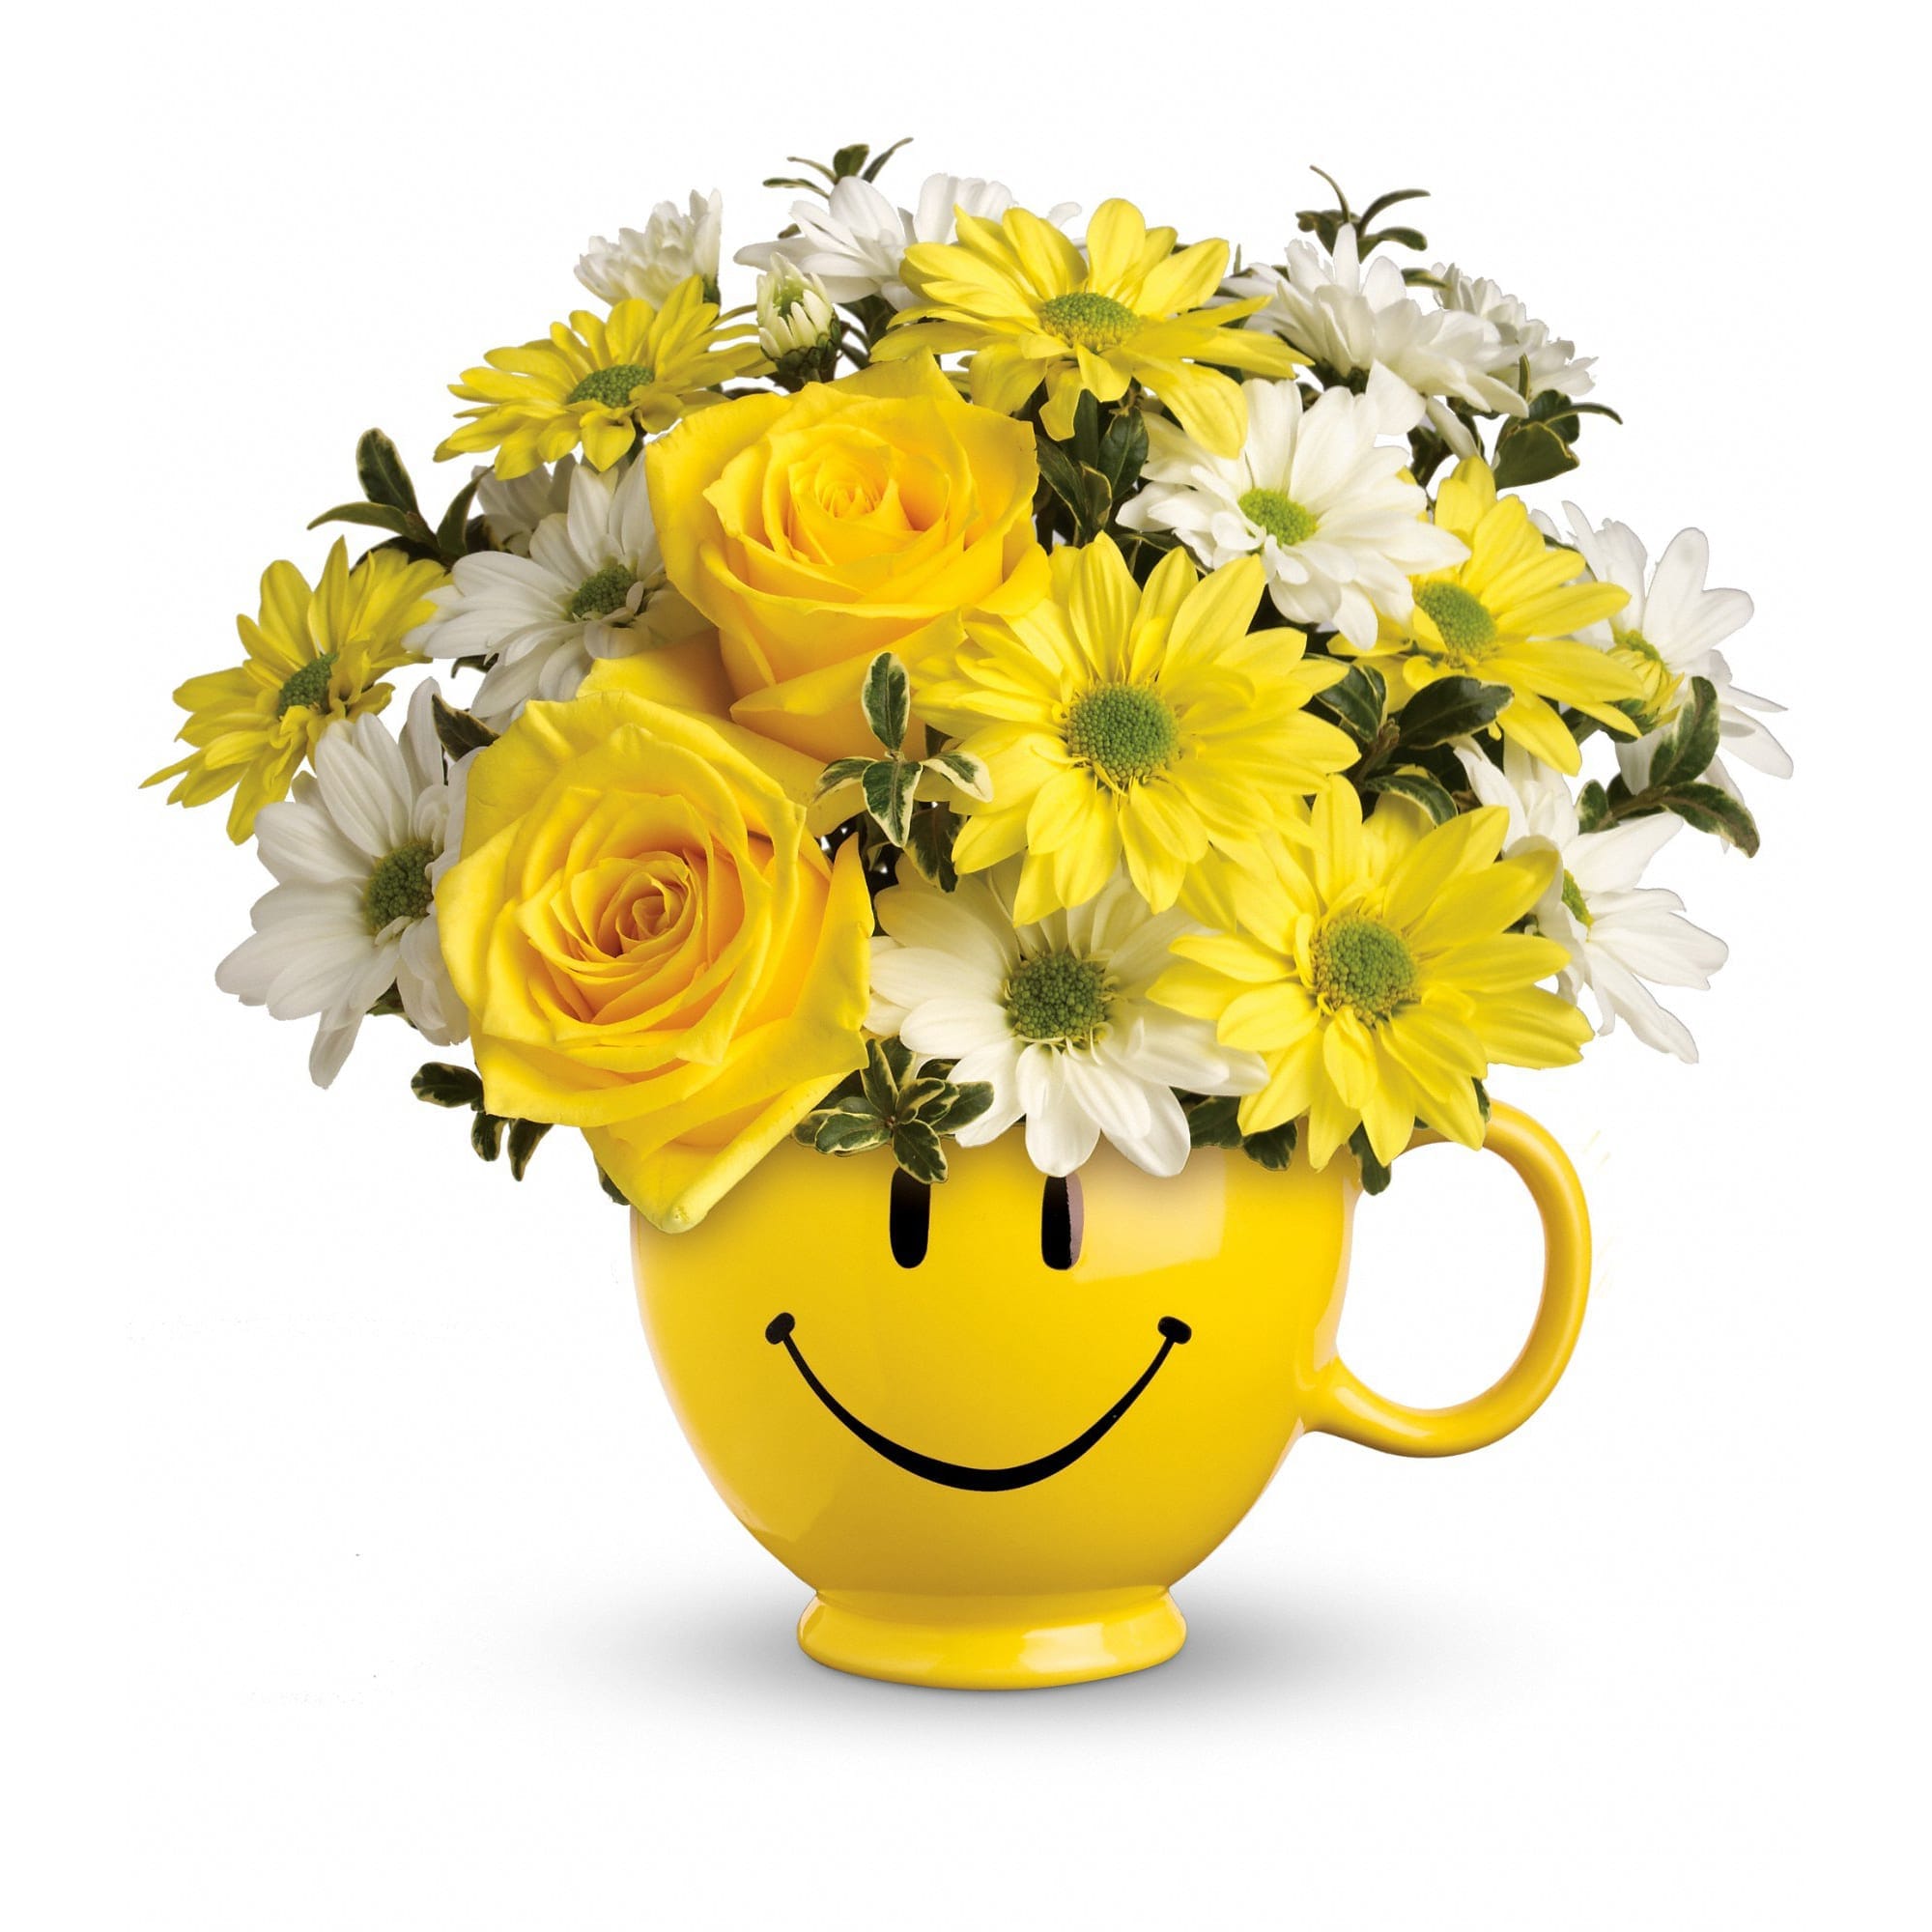 Teleflora's Be Happy Bouquet With Roses  - There are probably a million reasons this is such a popular bouquet. Of course, there are probably just as many reasons to send this cheerful arrangement. Full of happy flowers, this ceramic happy face mug will bring smiles for years to come. Especially when filled with that first cup of morning coffee or cocoa!